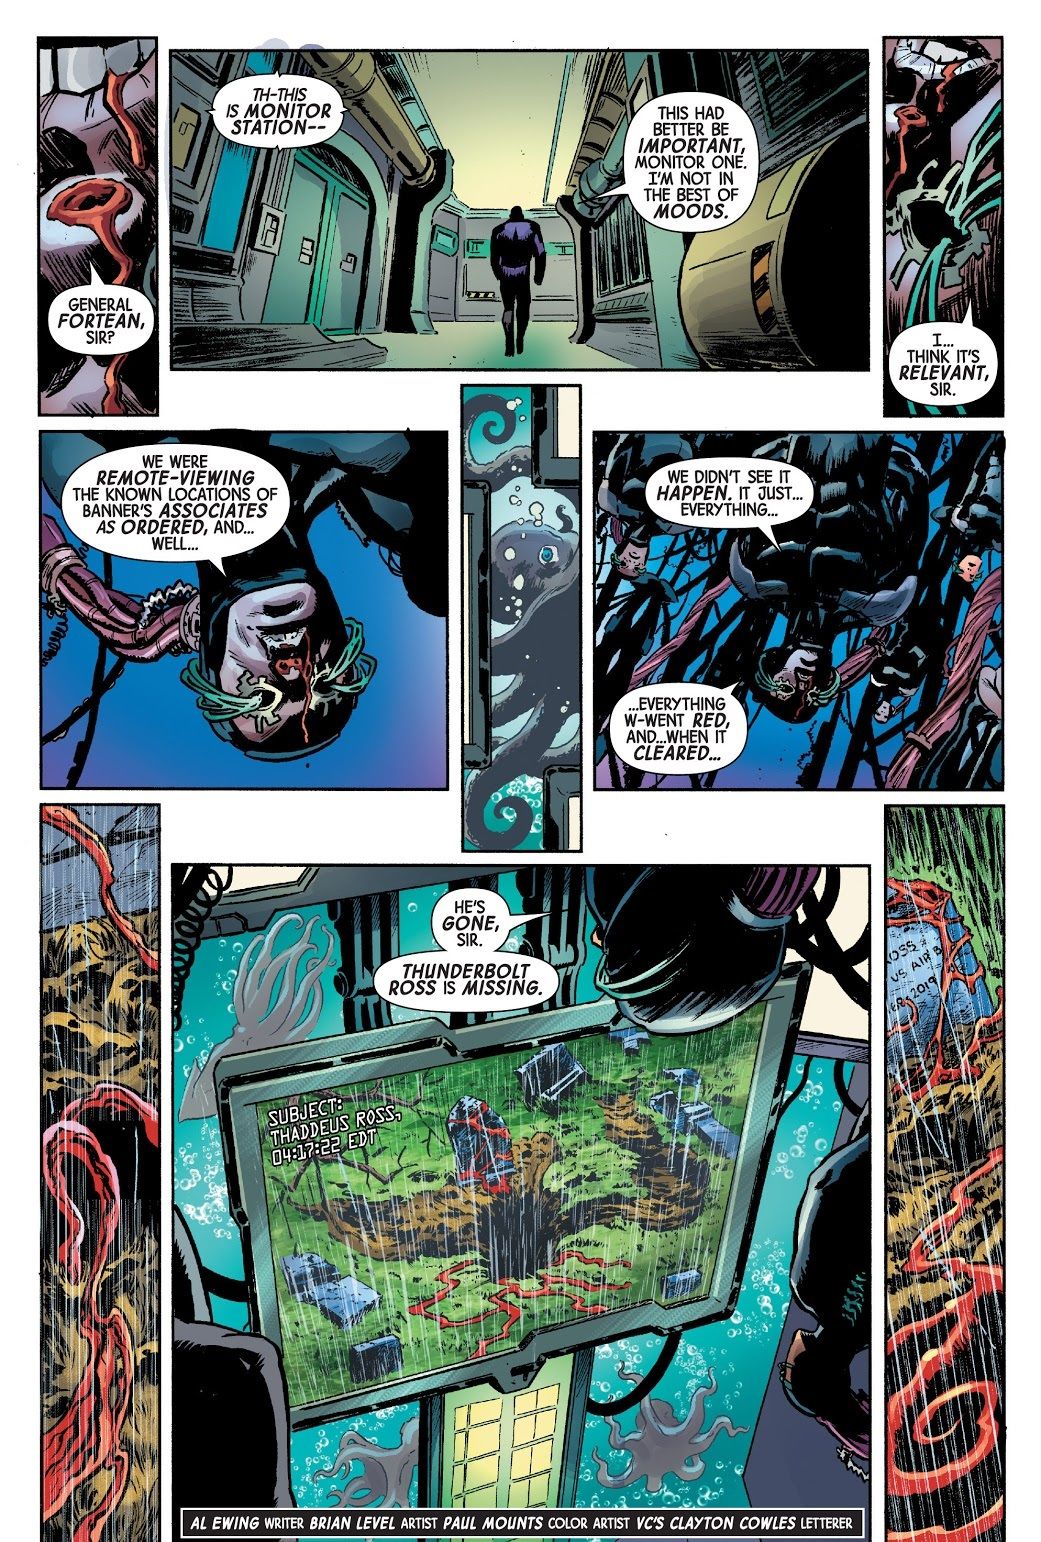 Immortal Hulk 20 Absolute Carnage after-credits scene